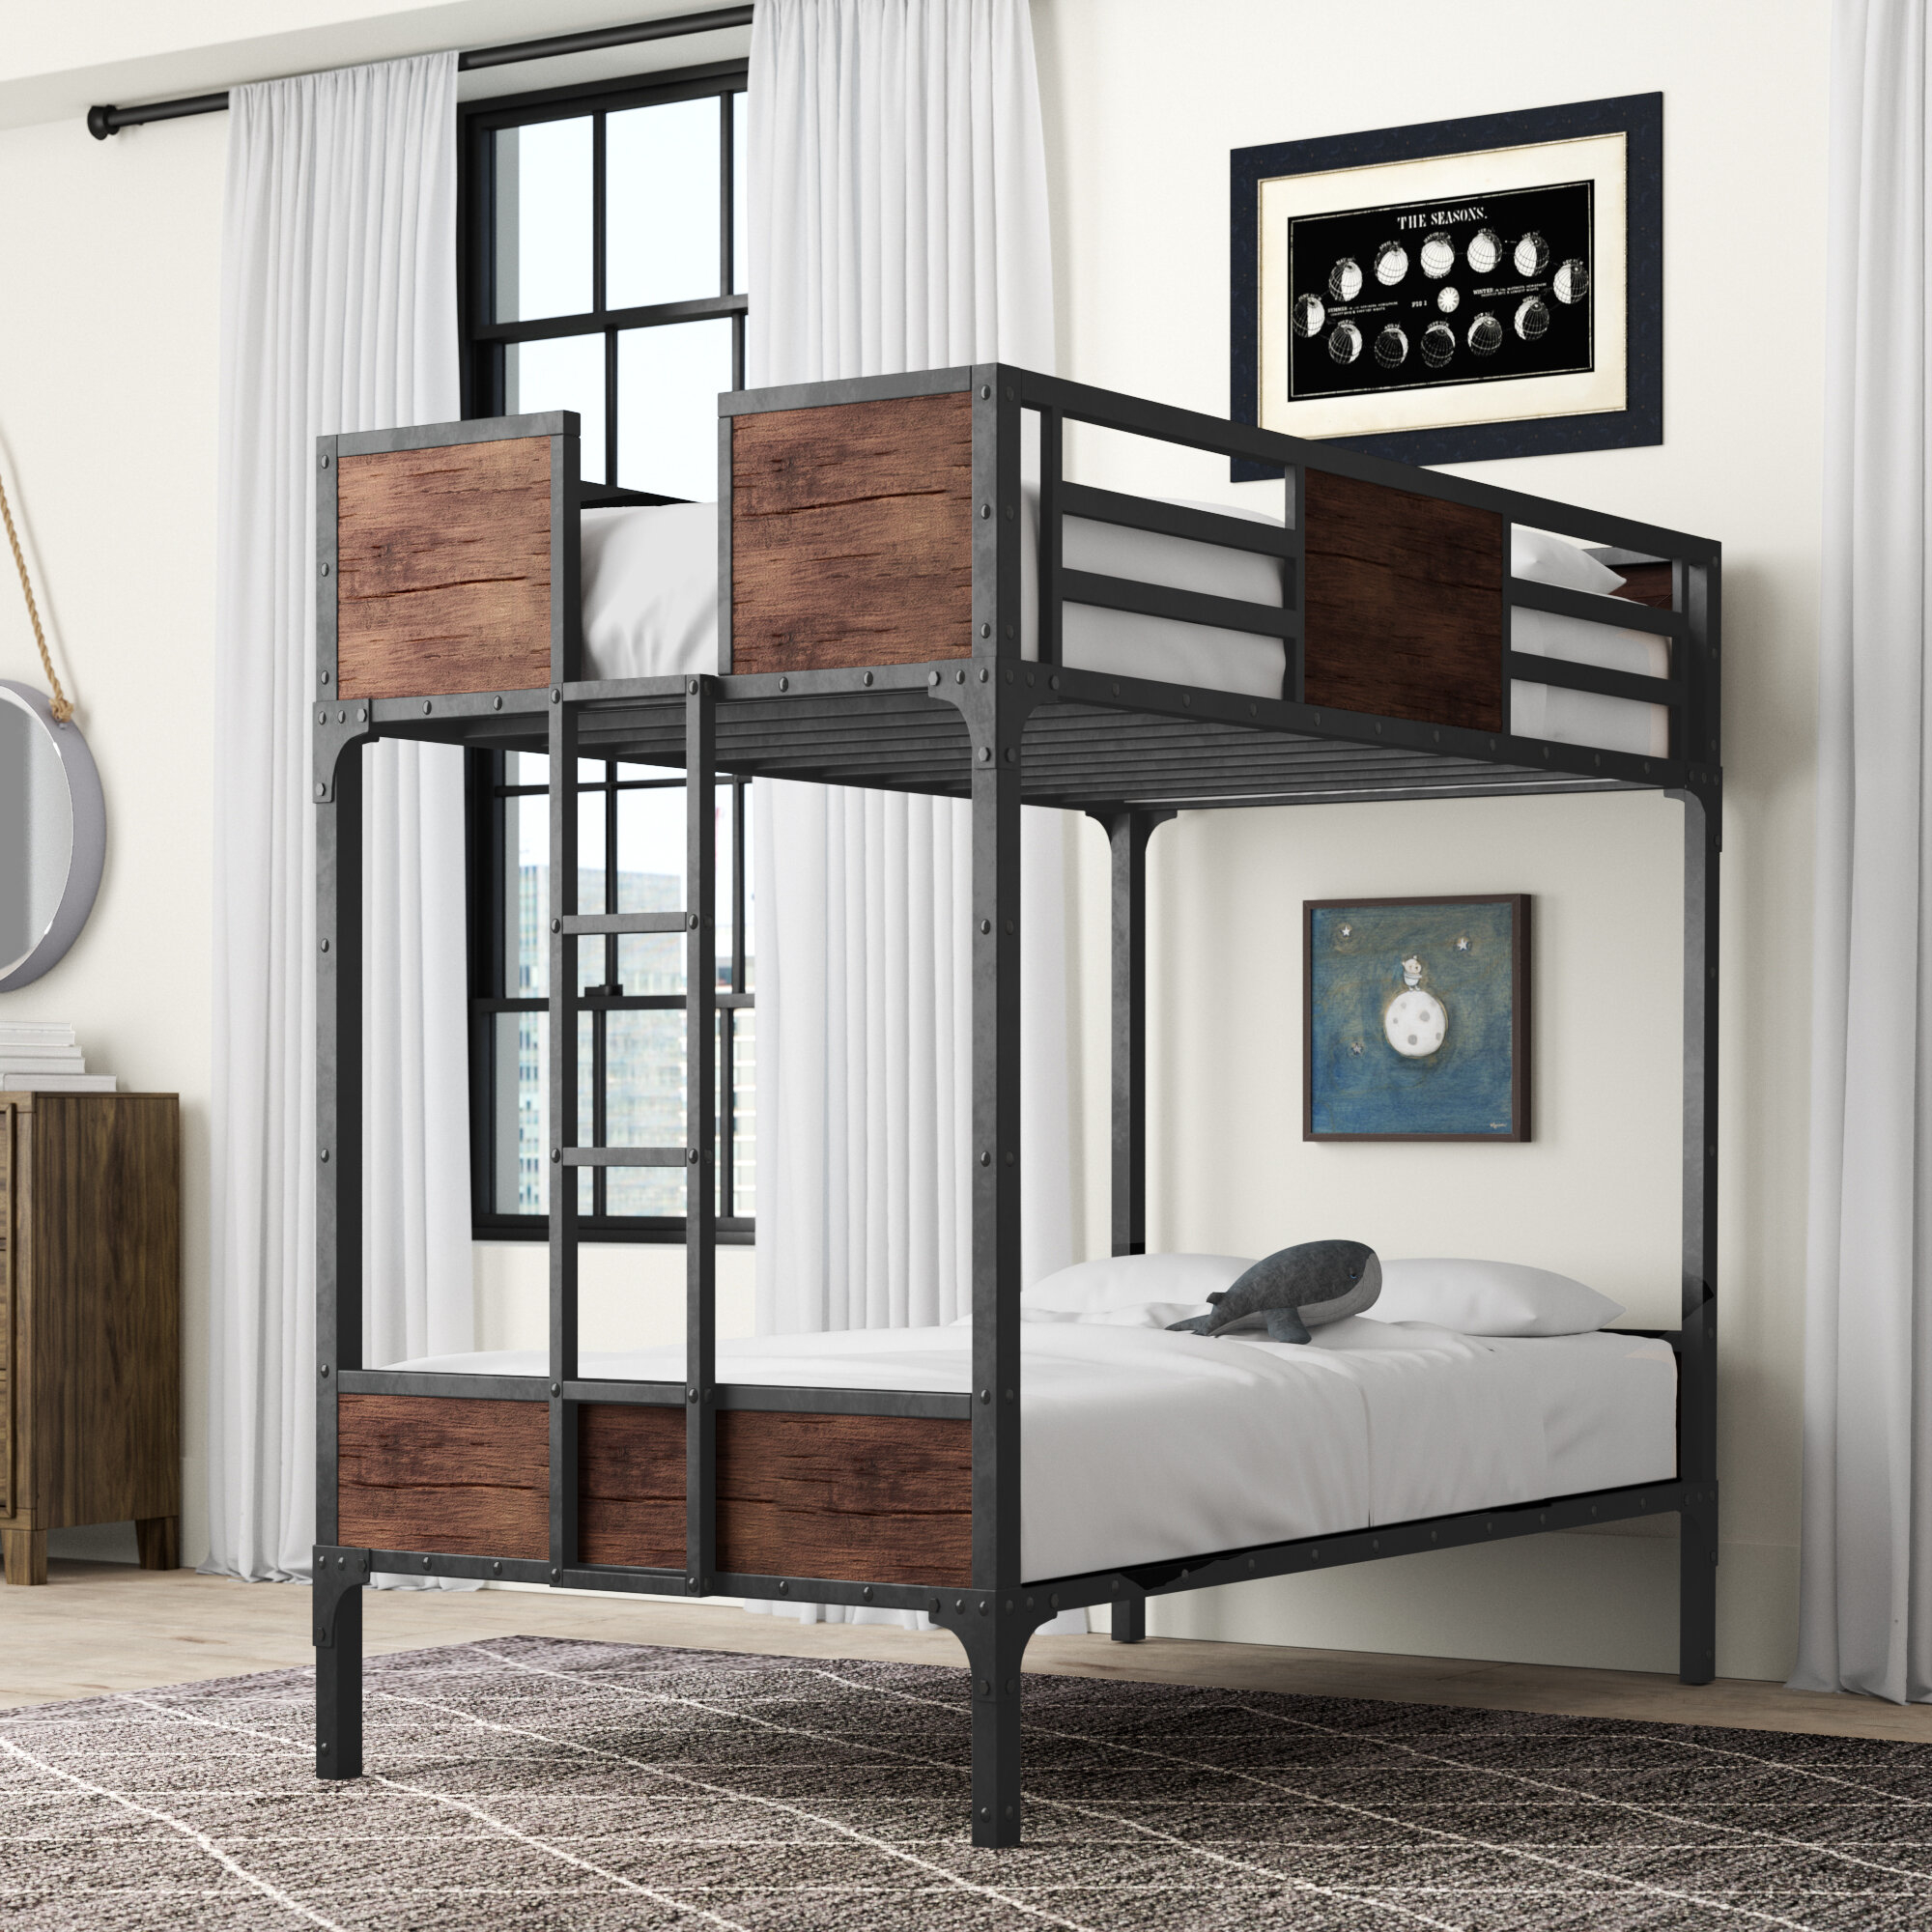 Heavy Duty Bunk Beds Visualhunt, Bunk Beds For Heavy People